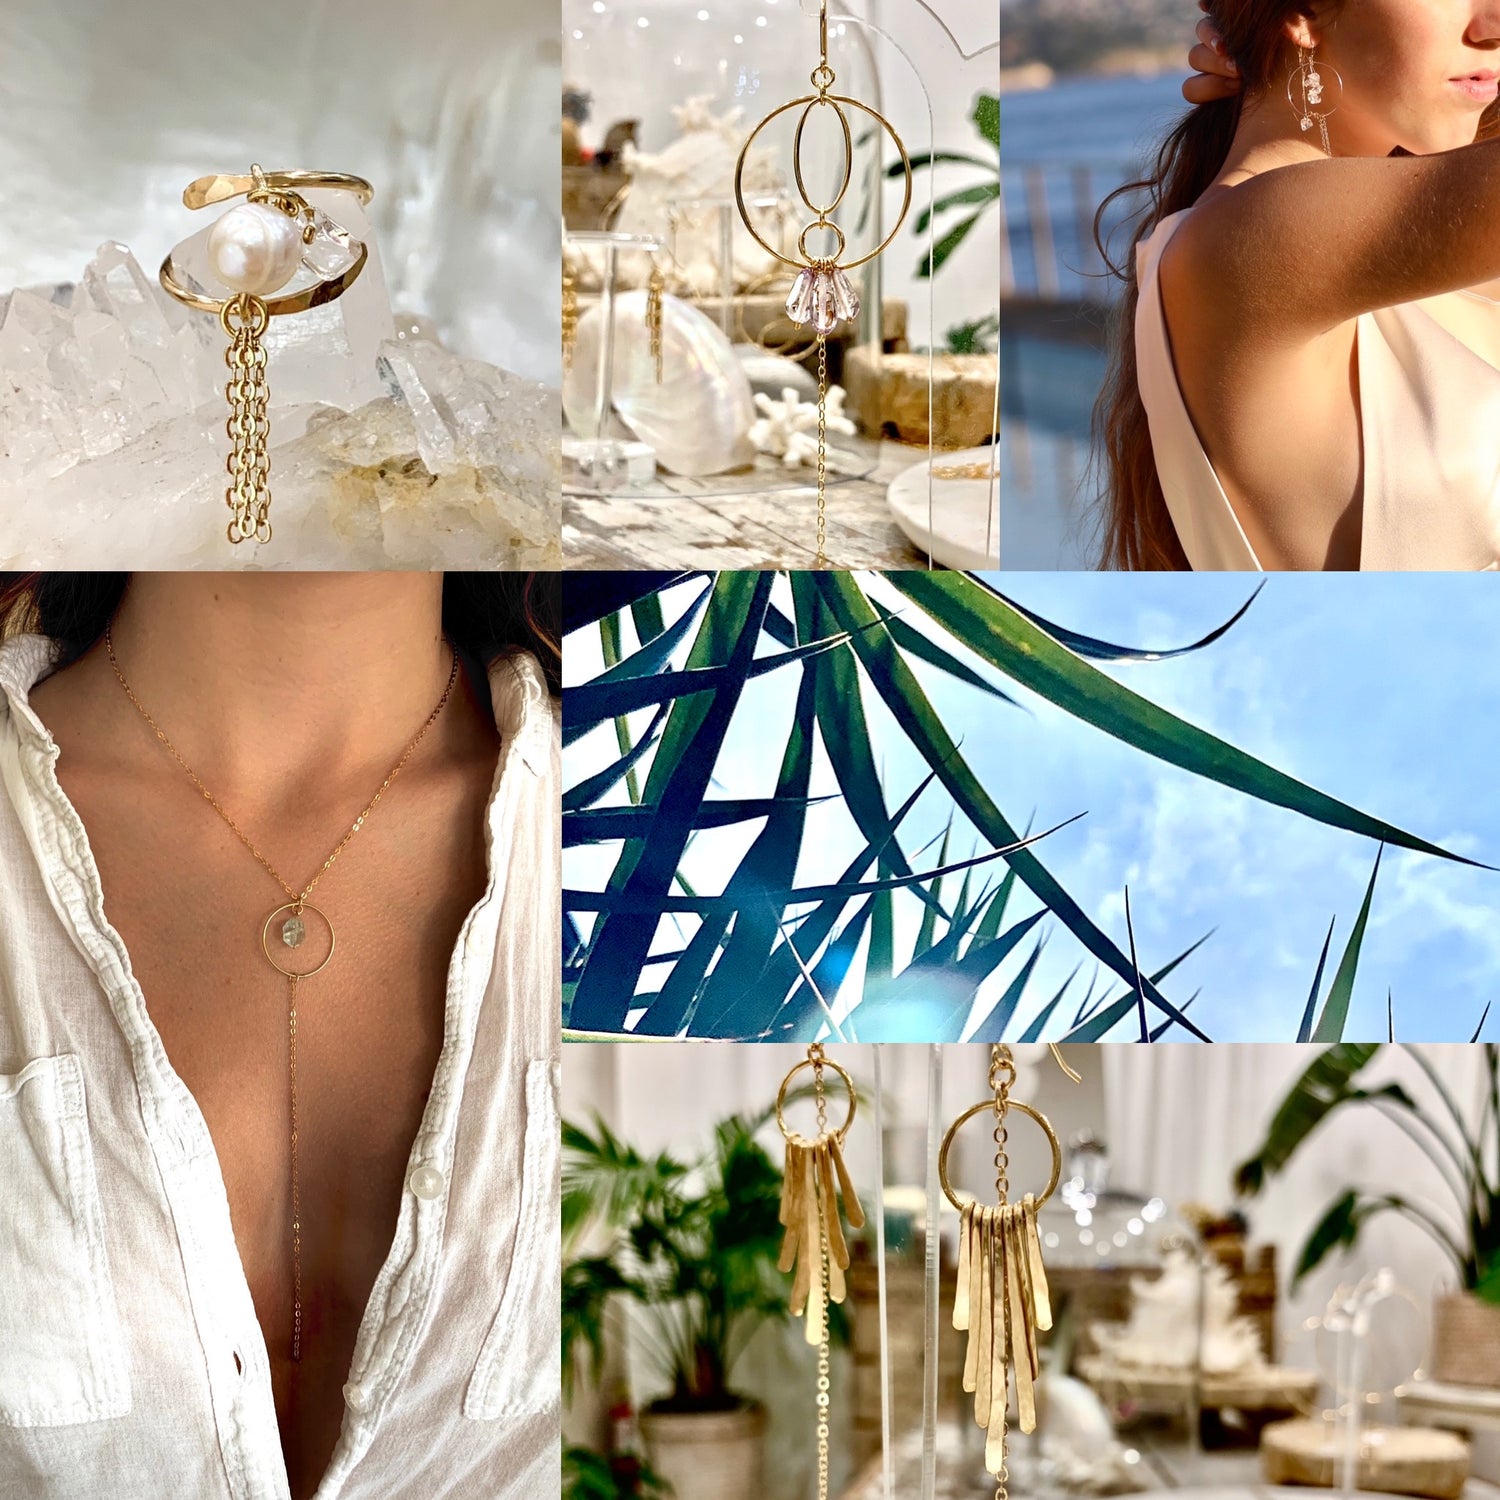 beautiful handcrafted jewellery, designed & made in Sydney using 14ct gold filled and silver findings with natural semi precious gems, crystals, pearls, seaglass, leather, cotton & silk thread